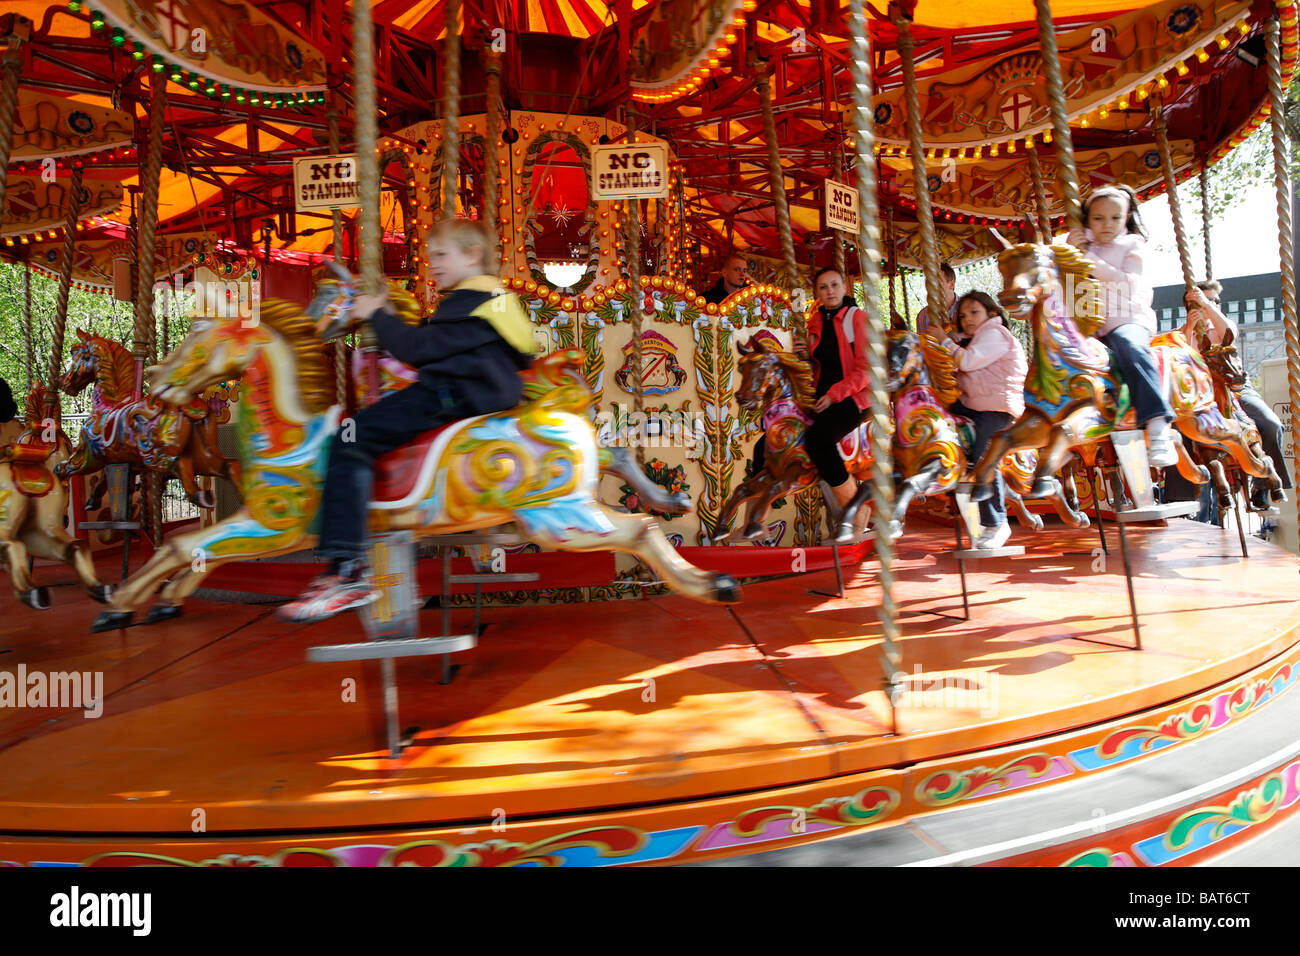 Old fashioned merry go round fair ride Stock Photo